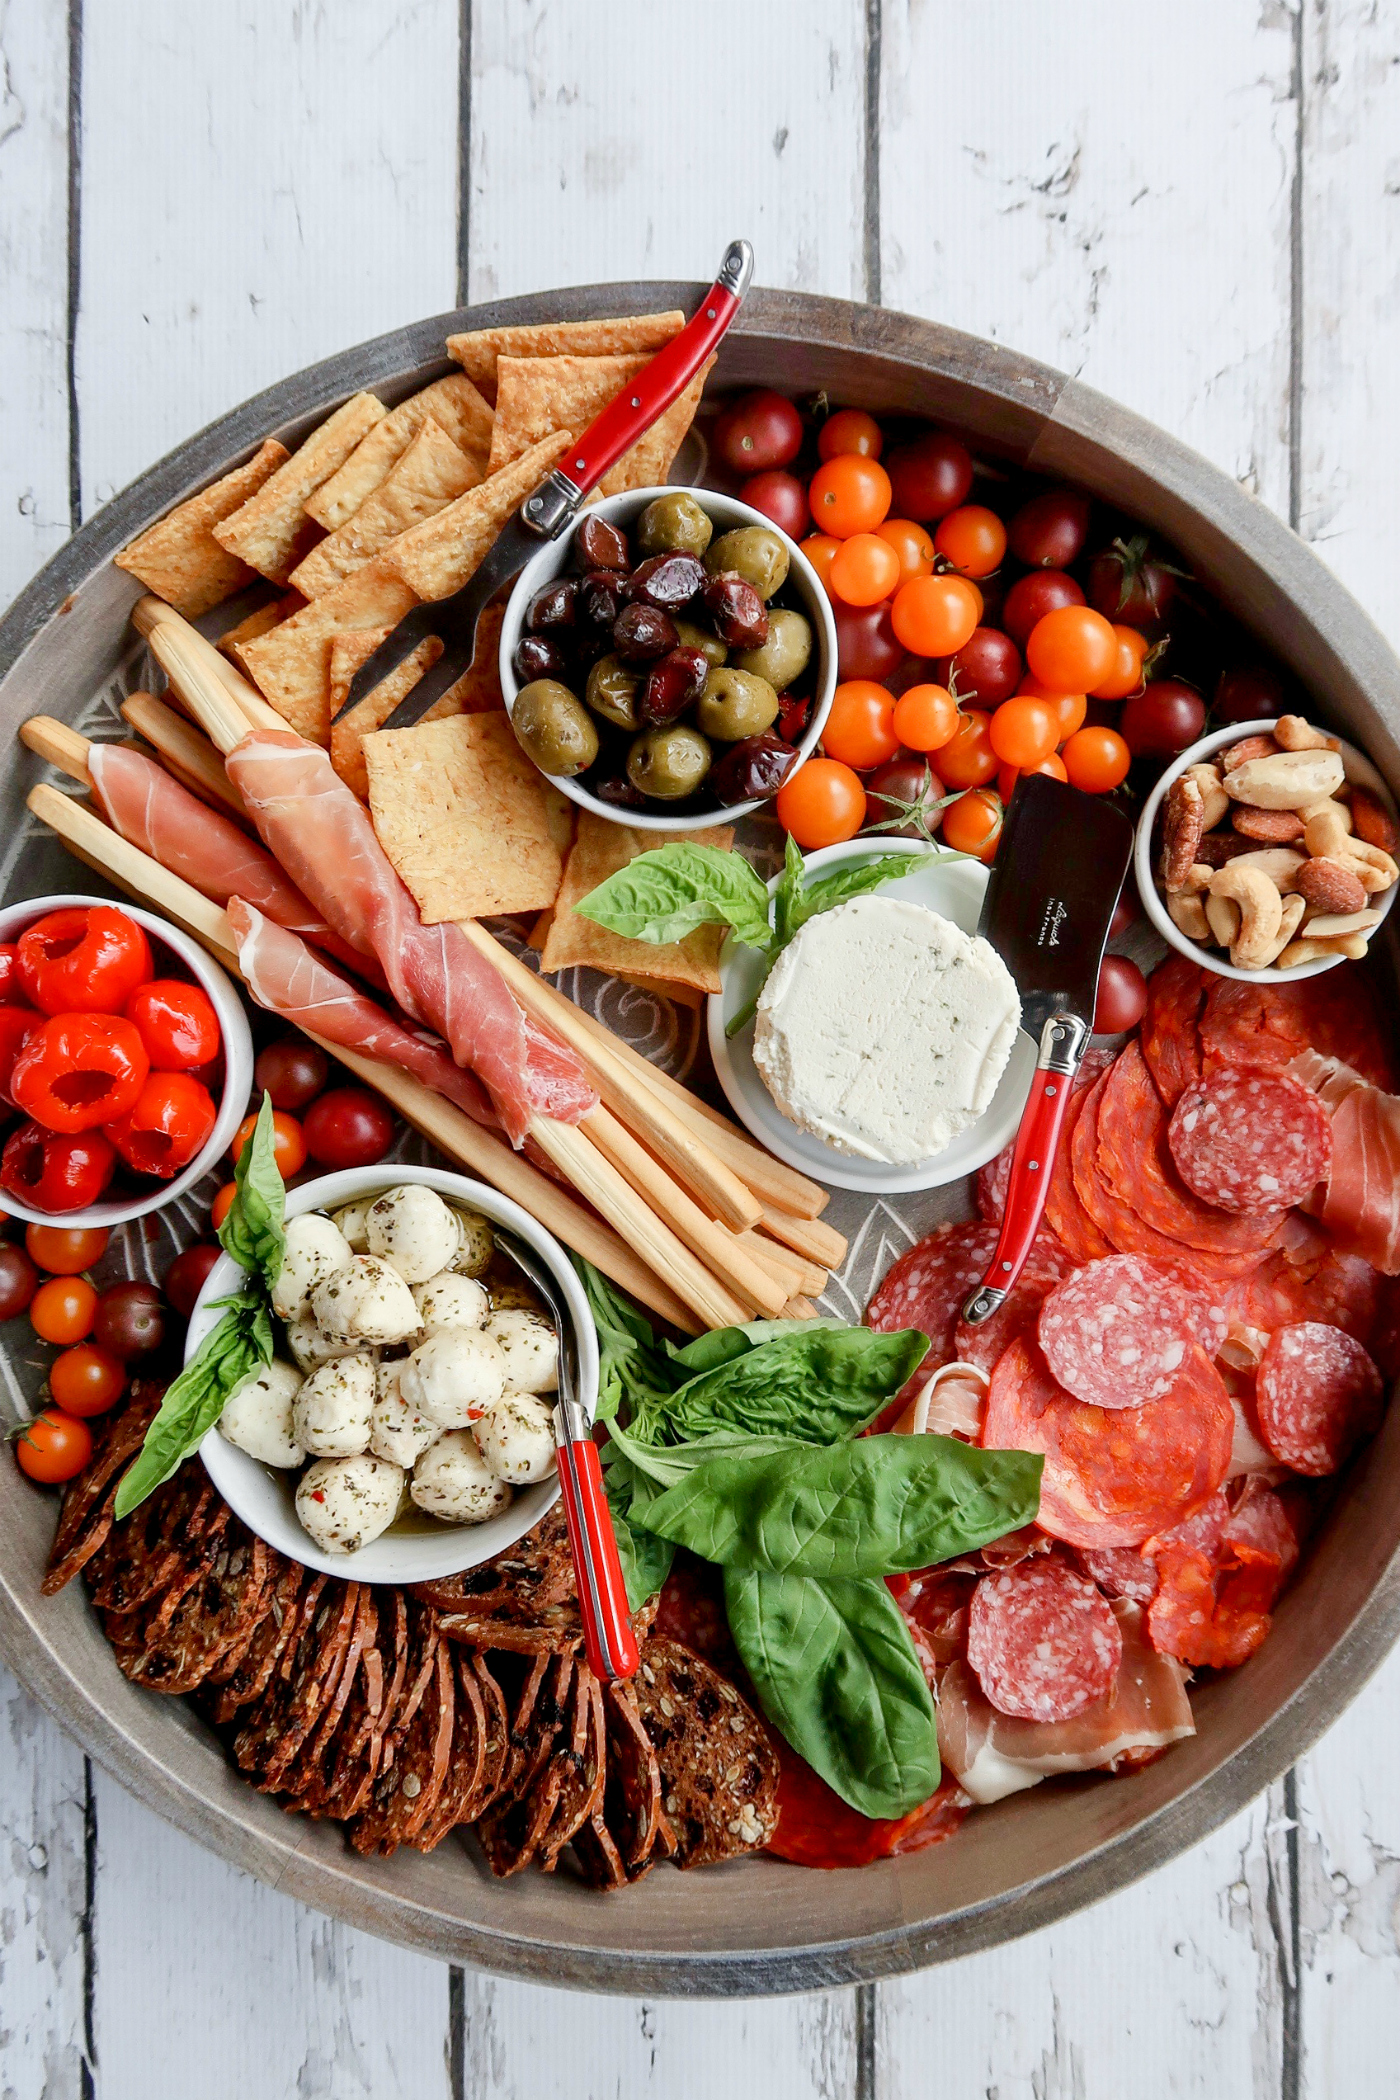 How to Make an Epic Charcuterie Board (video!) - Reluctant Entertainer